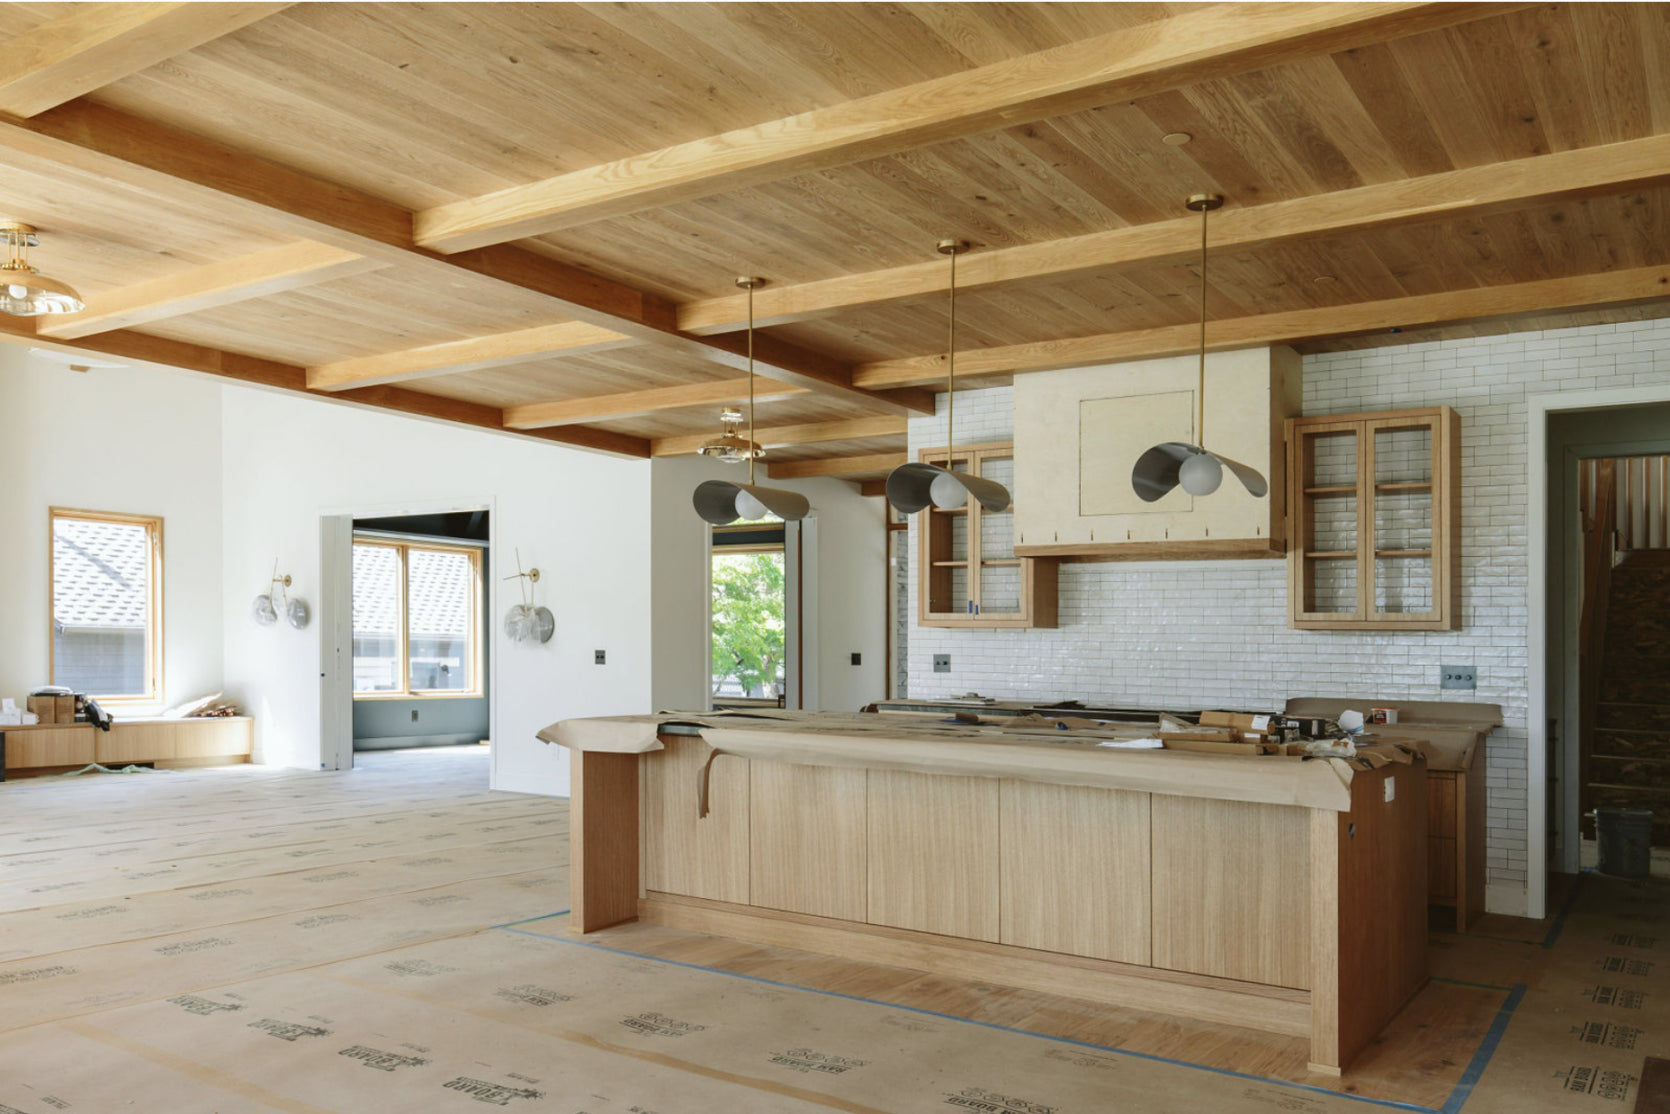 Drift wood ceilings in Emily Henderson's brother's River House